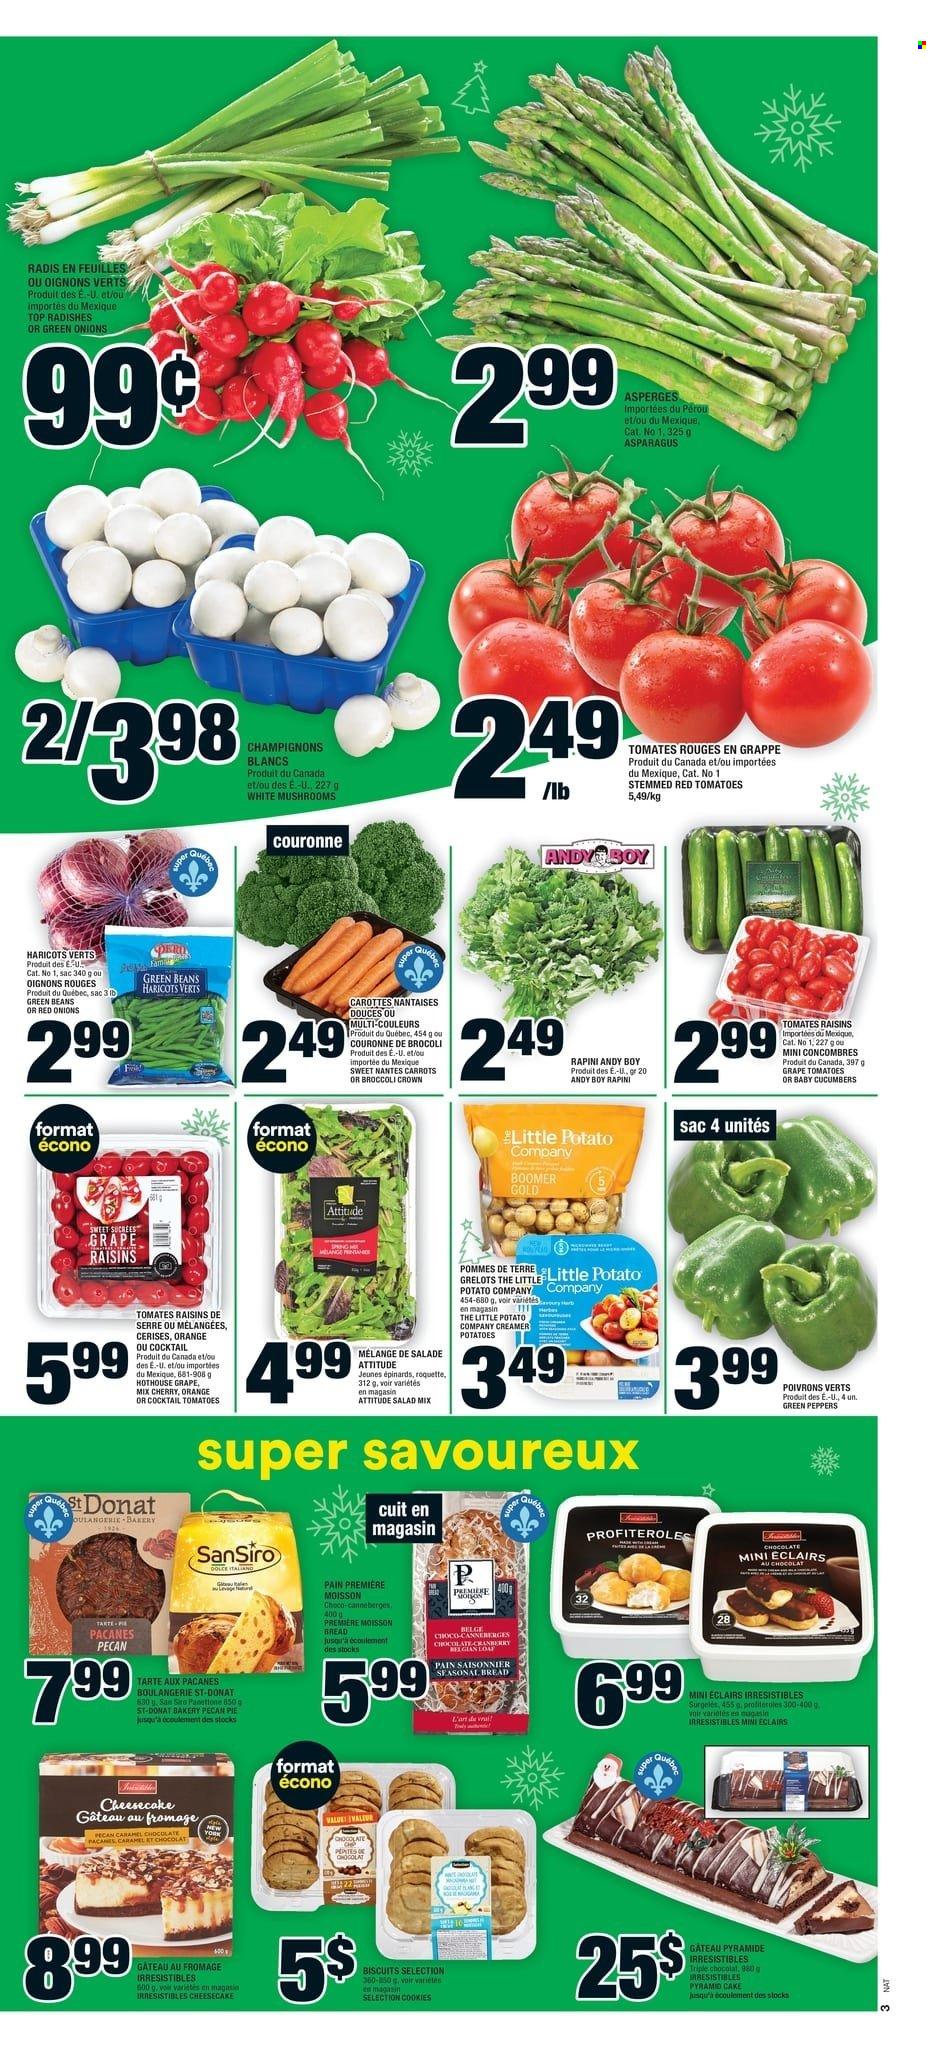 thumbnail - Super C Flyer - December 16, 2021 - December 22, 2021 - Sales products - bread, cake, pie, panettone, cheesecake, asparagus, beans, broccoli, carrots, cucumber, green beans, radishes, red onions, tomatoes, potatoes, salad, peppers, green onion, cherries, creamer, cookies, chocolate, biscuit, caramel, dried fruit, raisins, oranges. Page 4.